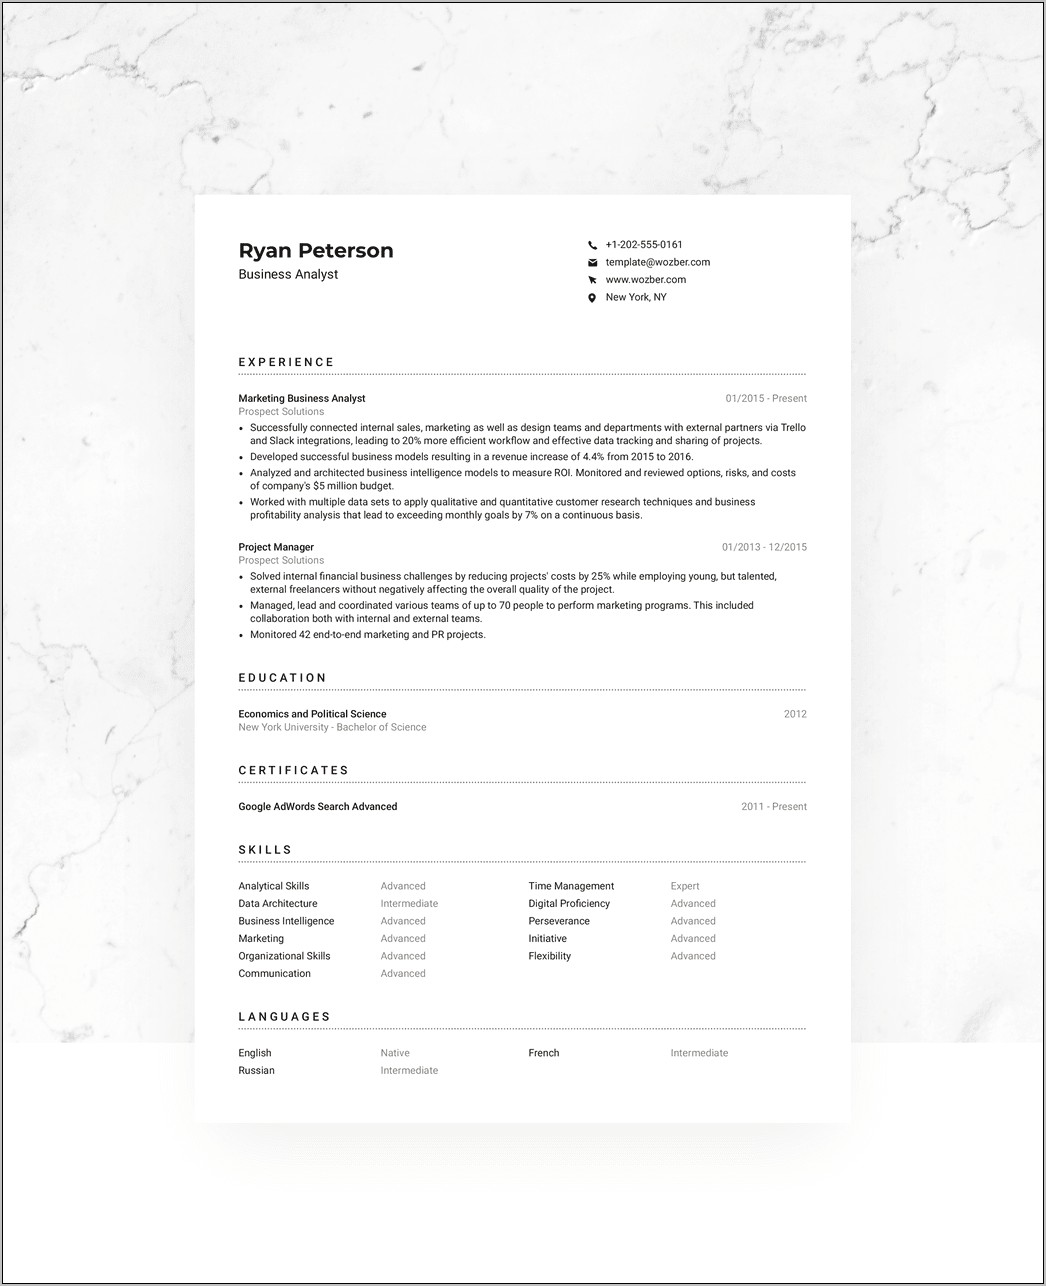 Applicant Tracking System Experience On Resume